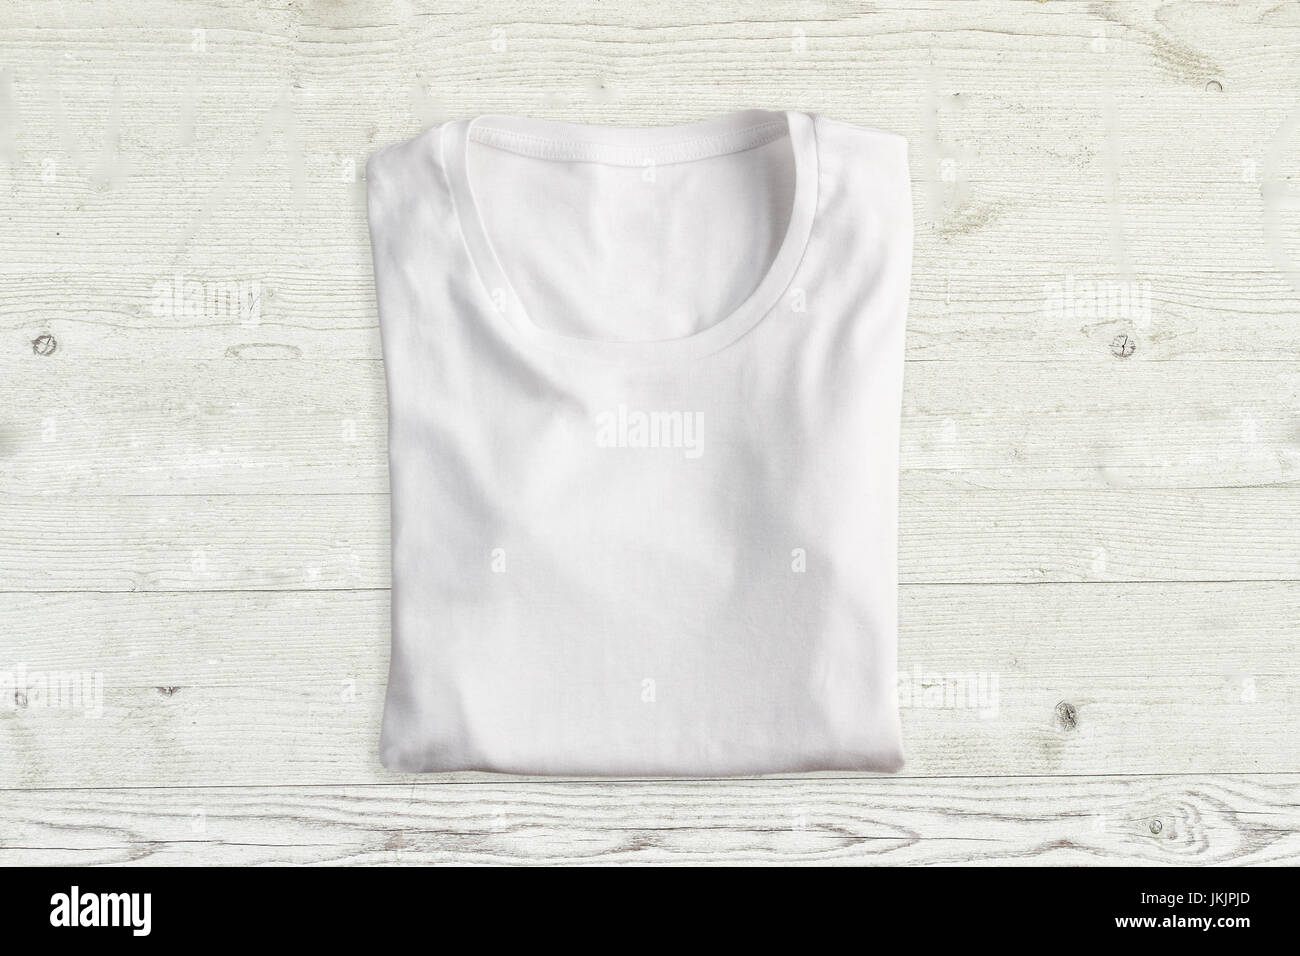 White folded t-shirt on wooden texture Stock Photo